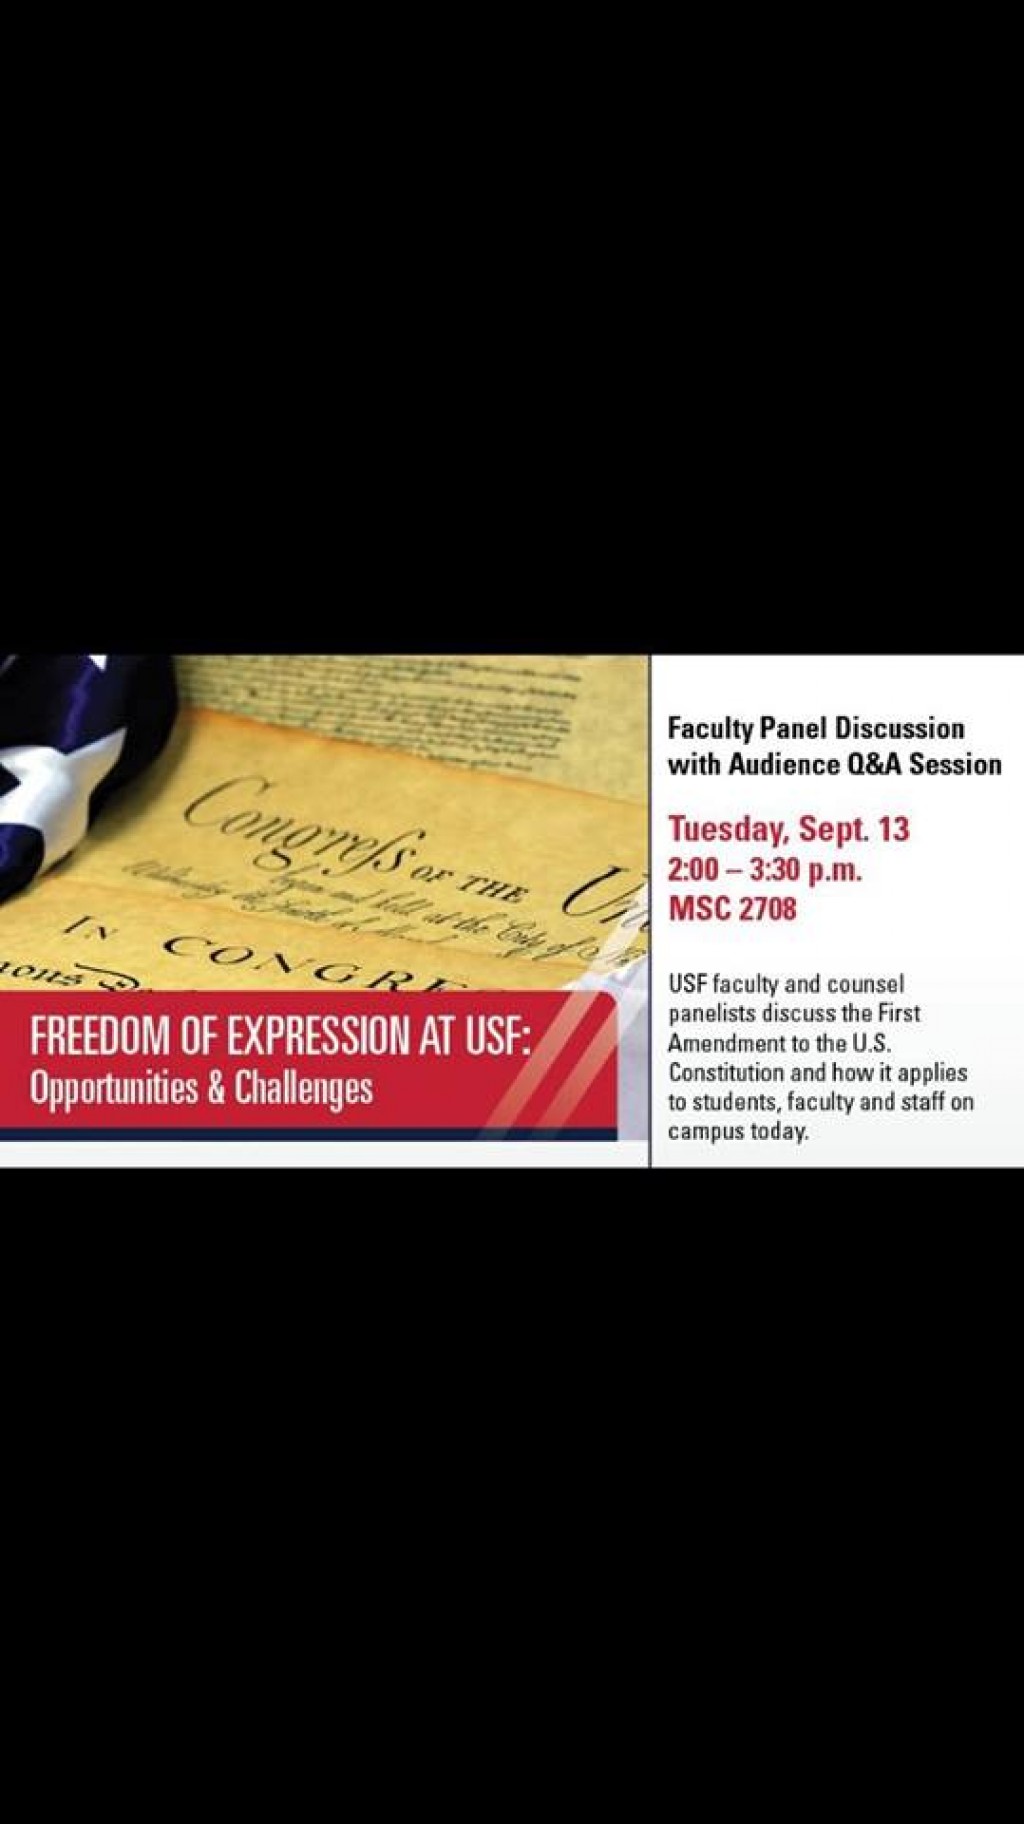 Panel to discuss freedom of expression